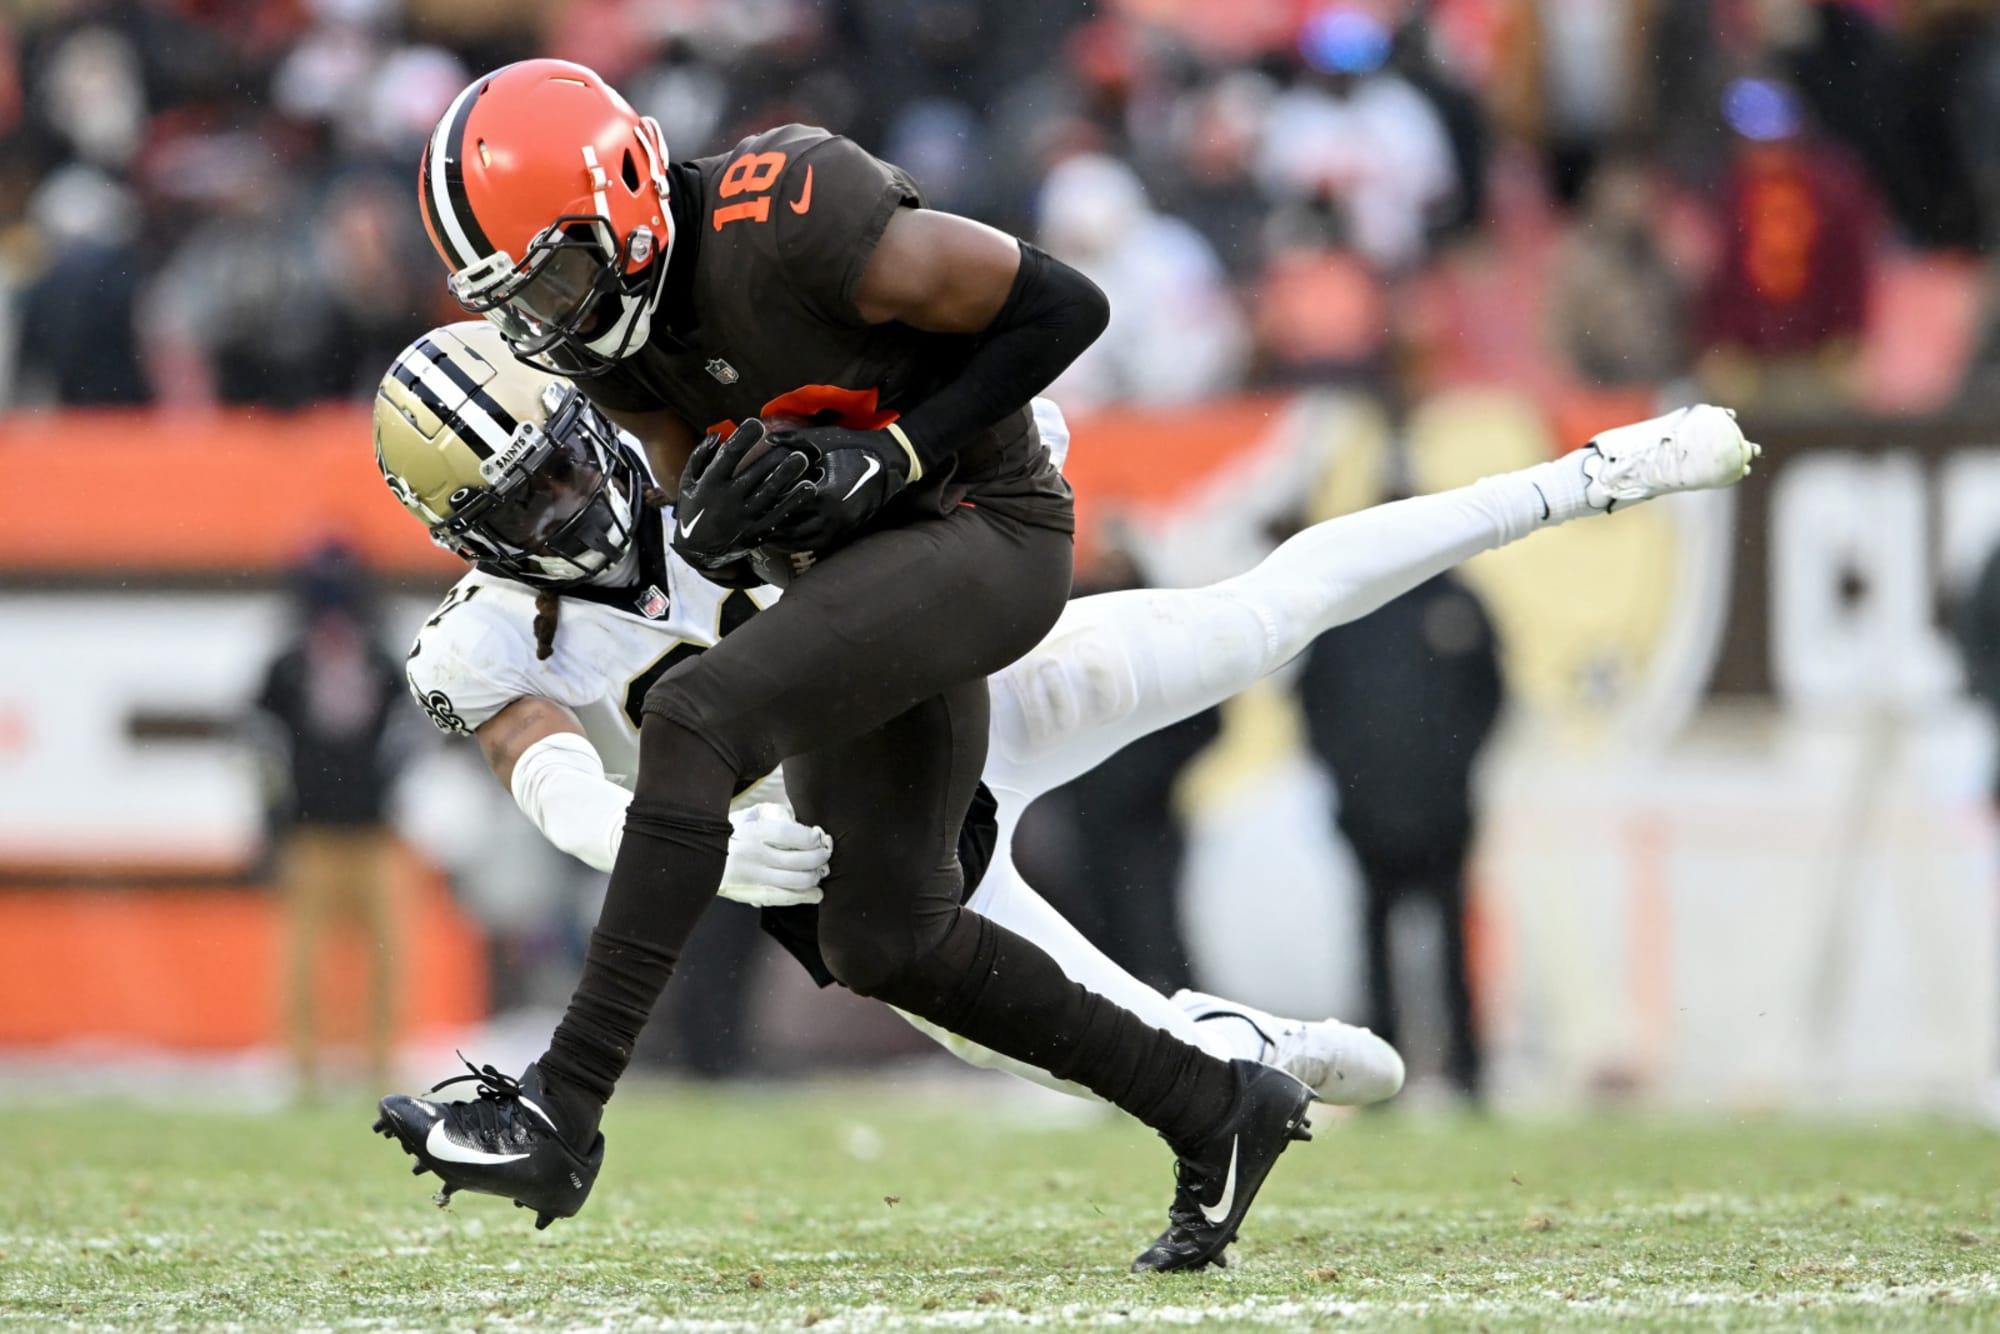 Browns: David Bell was excellent against man coverage as a rookie